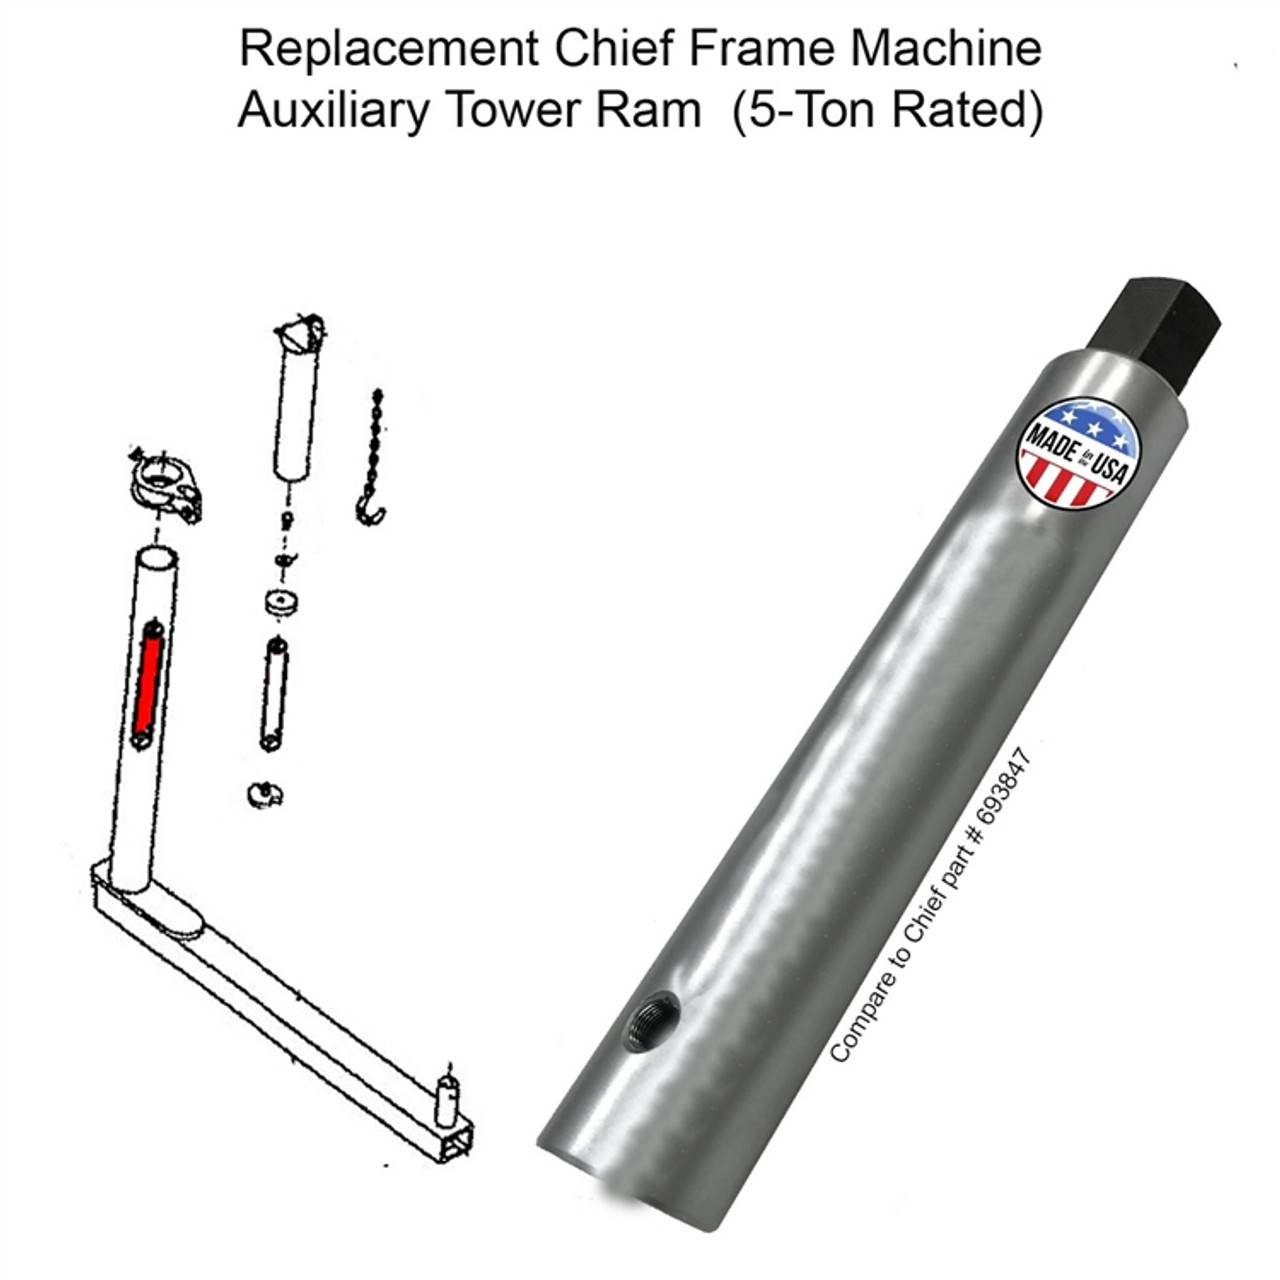 Replacement Chief Frame Machine Auxiliary tower Ram - S21 & Ez liner